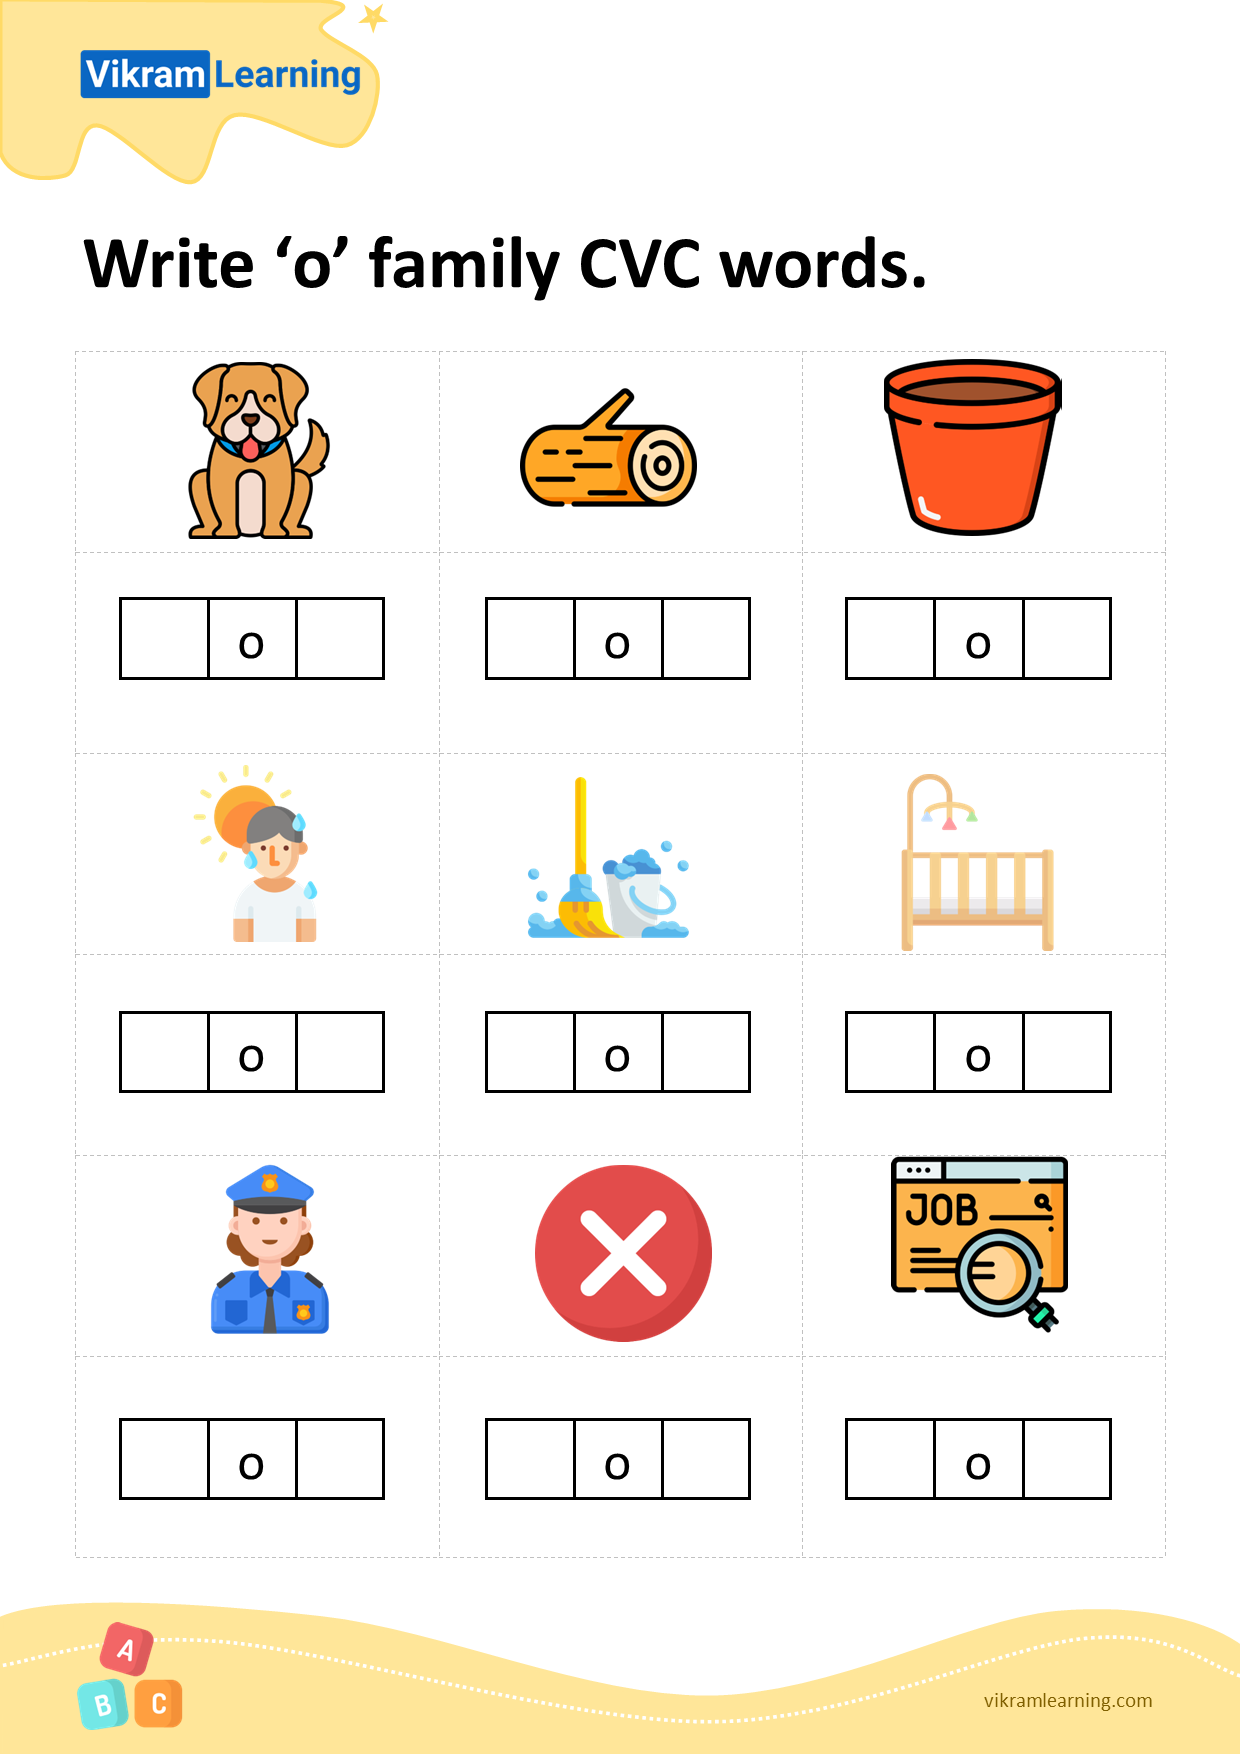 Download write 'o' family cvc words worksheets